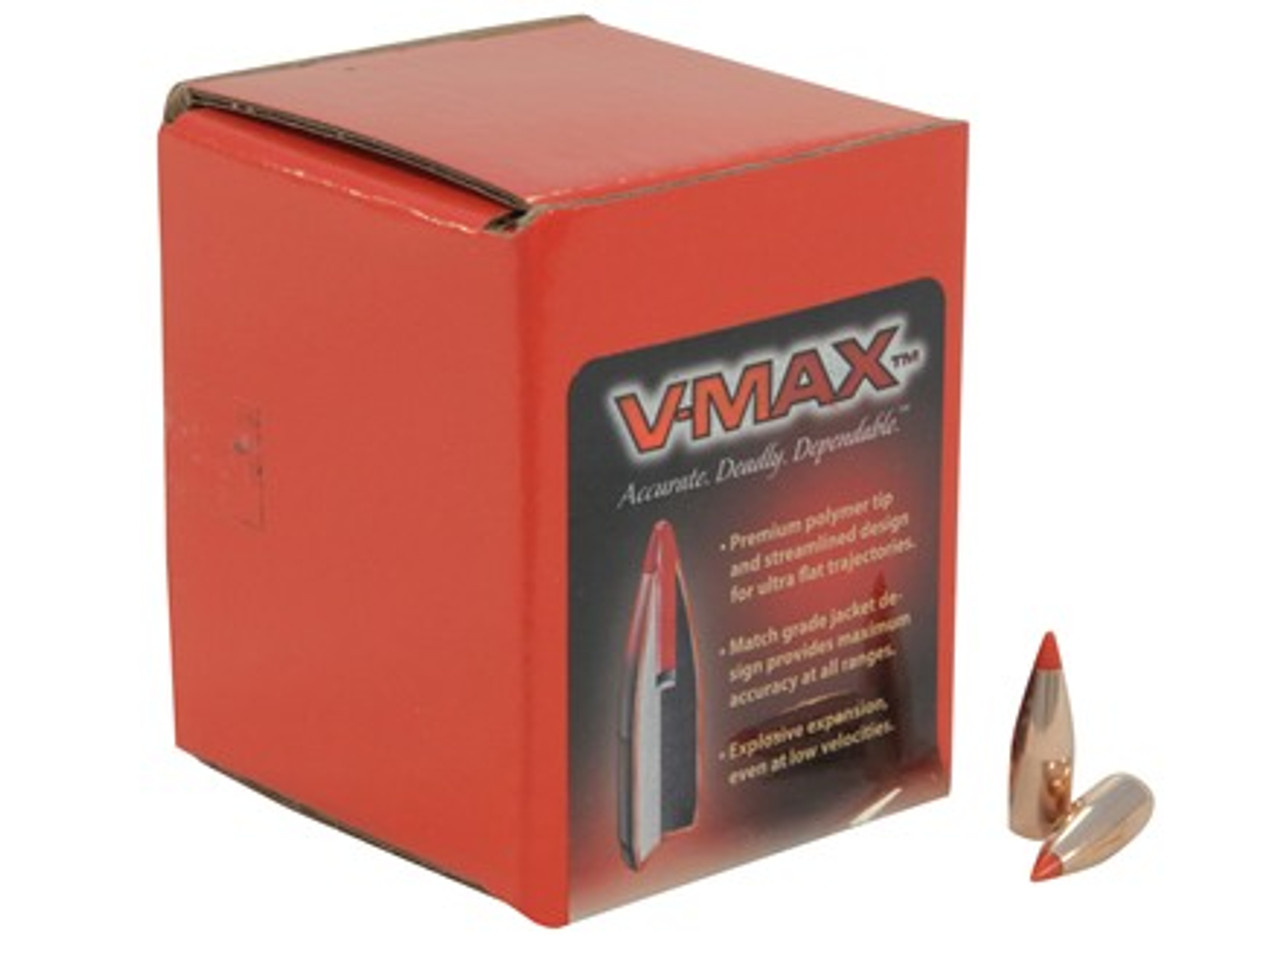 Hornady 6mm (.243") Projectiles,  58gr V-Max, Box of 100